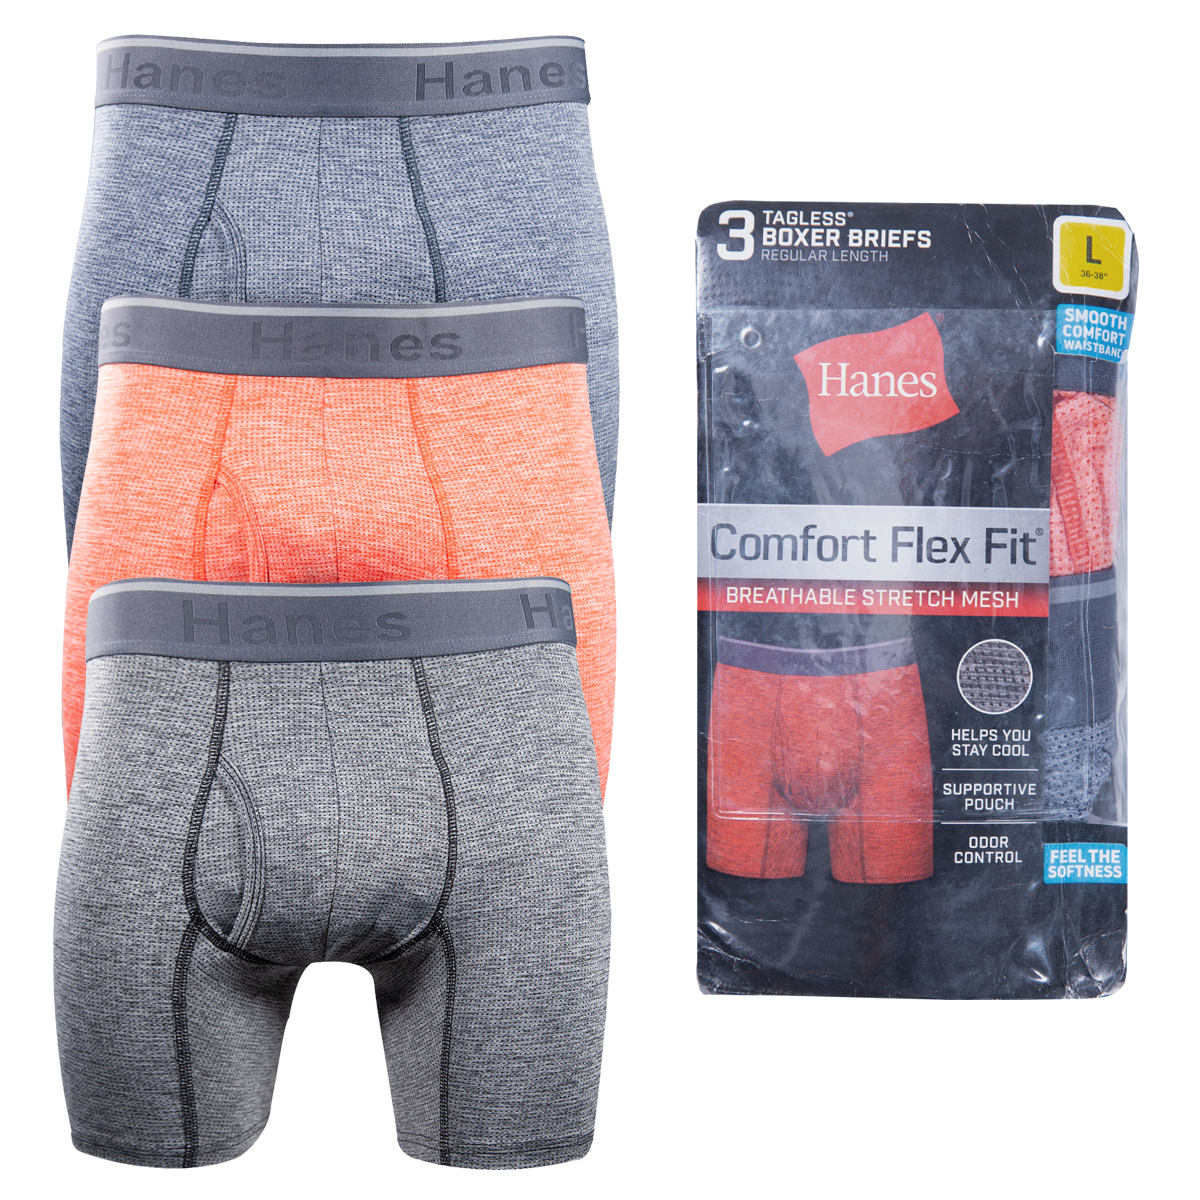 Hanes Men's 3 Pack Comfort Flex Fit Breathable Stretch Mesh Boxer Brie –  Spotted Clothing